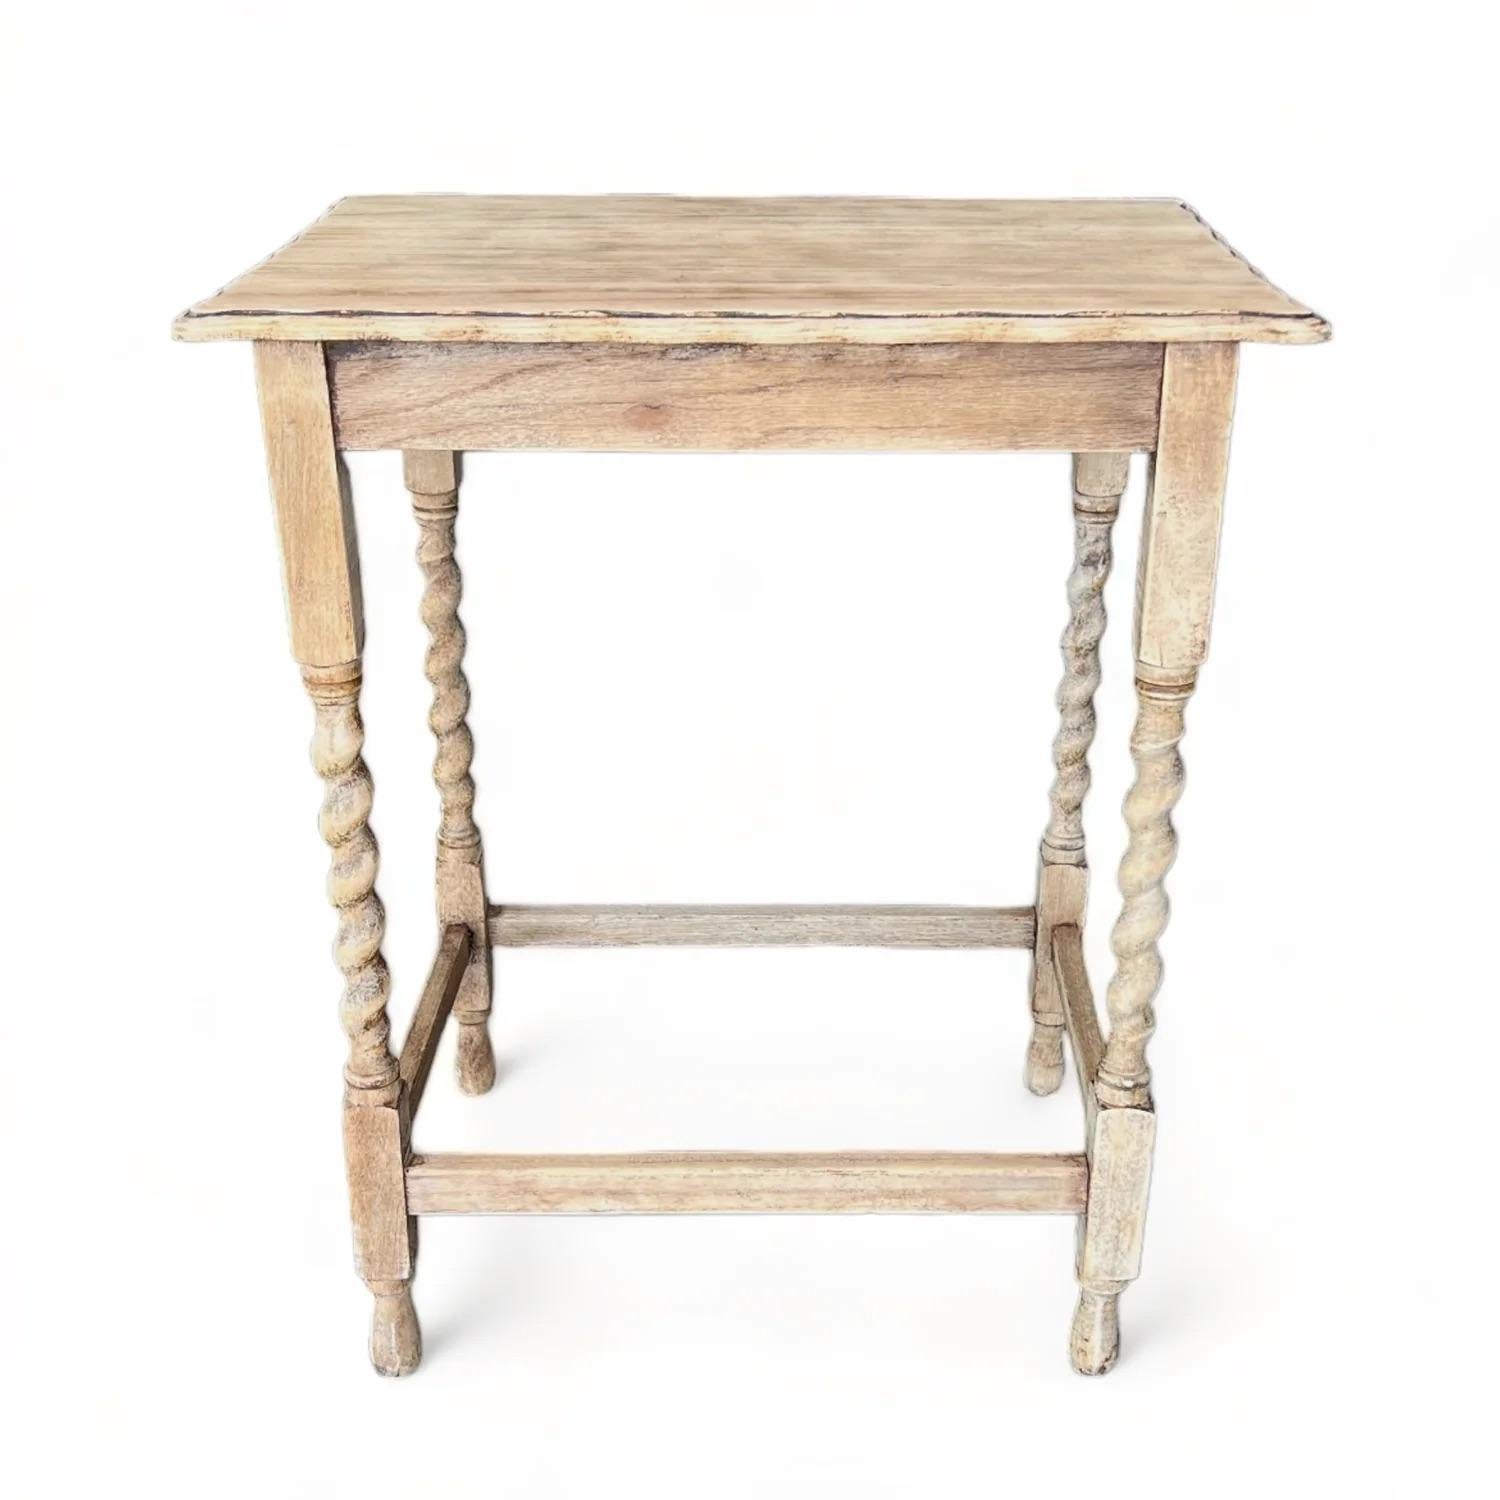 Elevate your space with this Vintage Swedish Gustavian Side Table from the 1900s. Crafted from light solid wood, pear shaped feet with a block stretcher for stability and support, it's in very good sturdy condition.

The table's beveled, scalloped